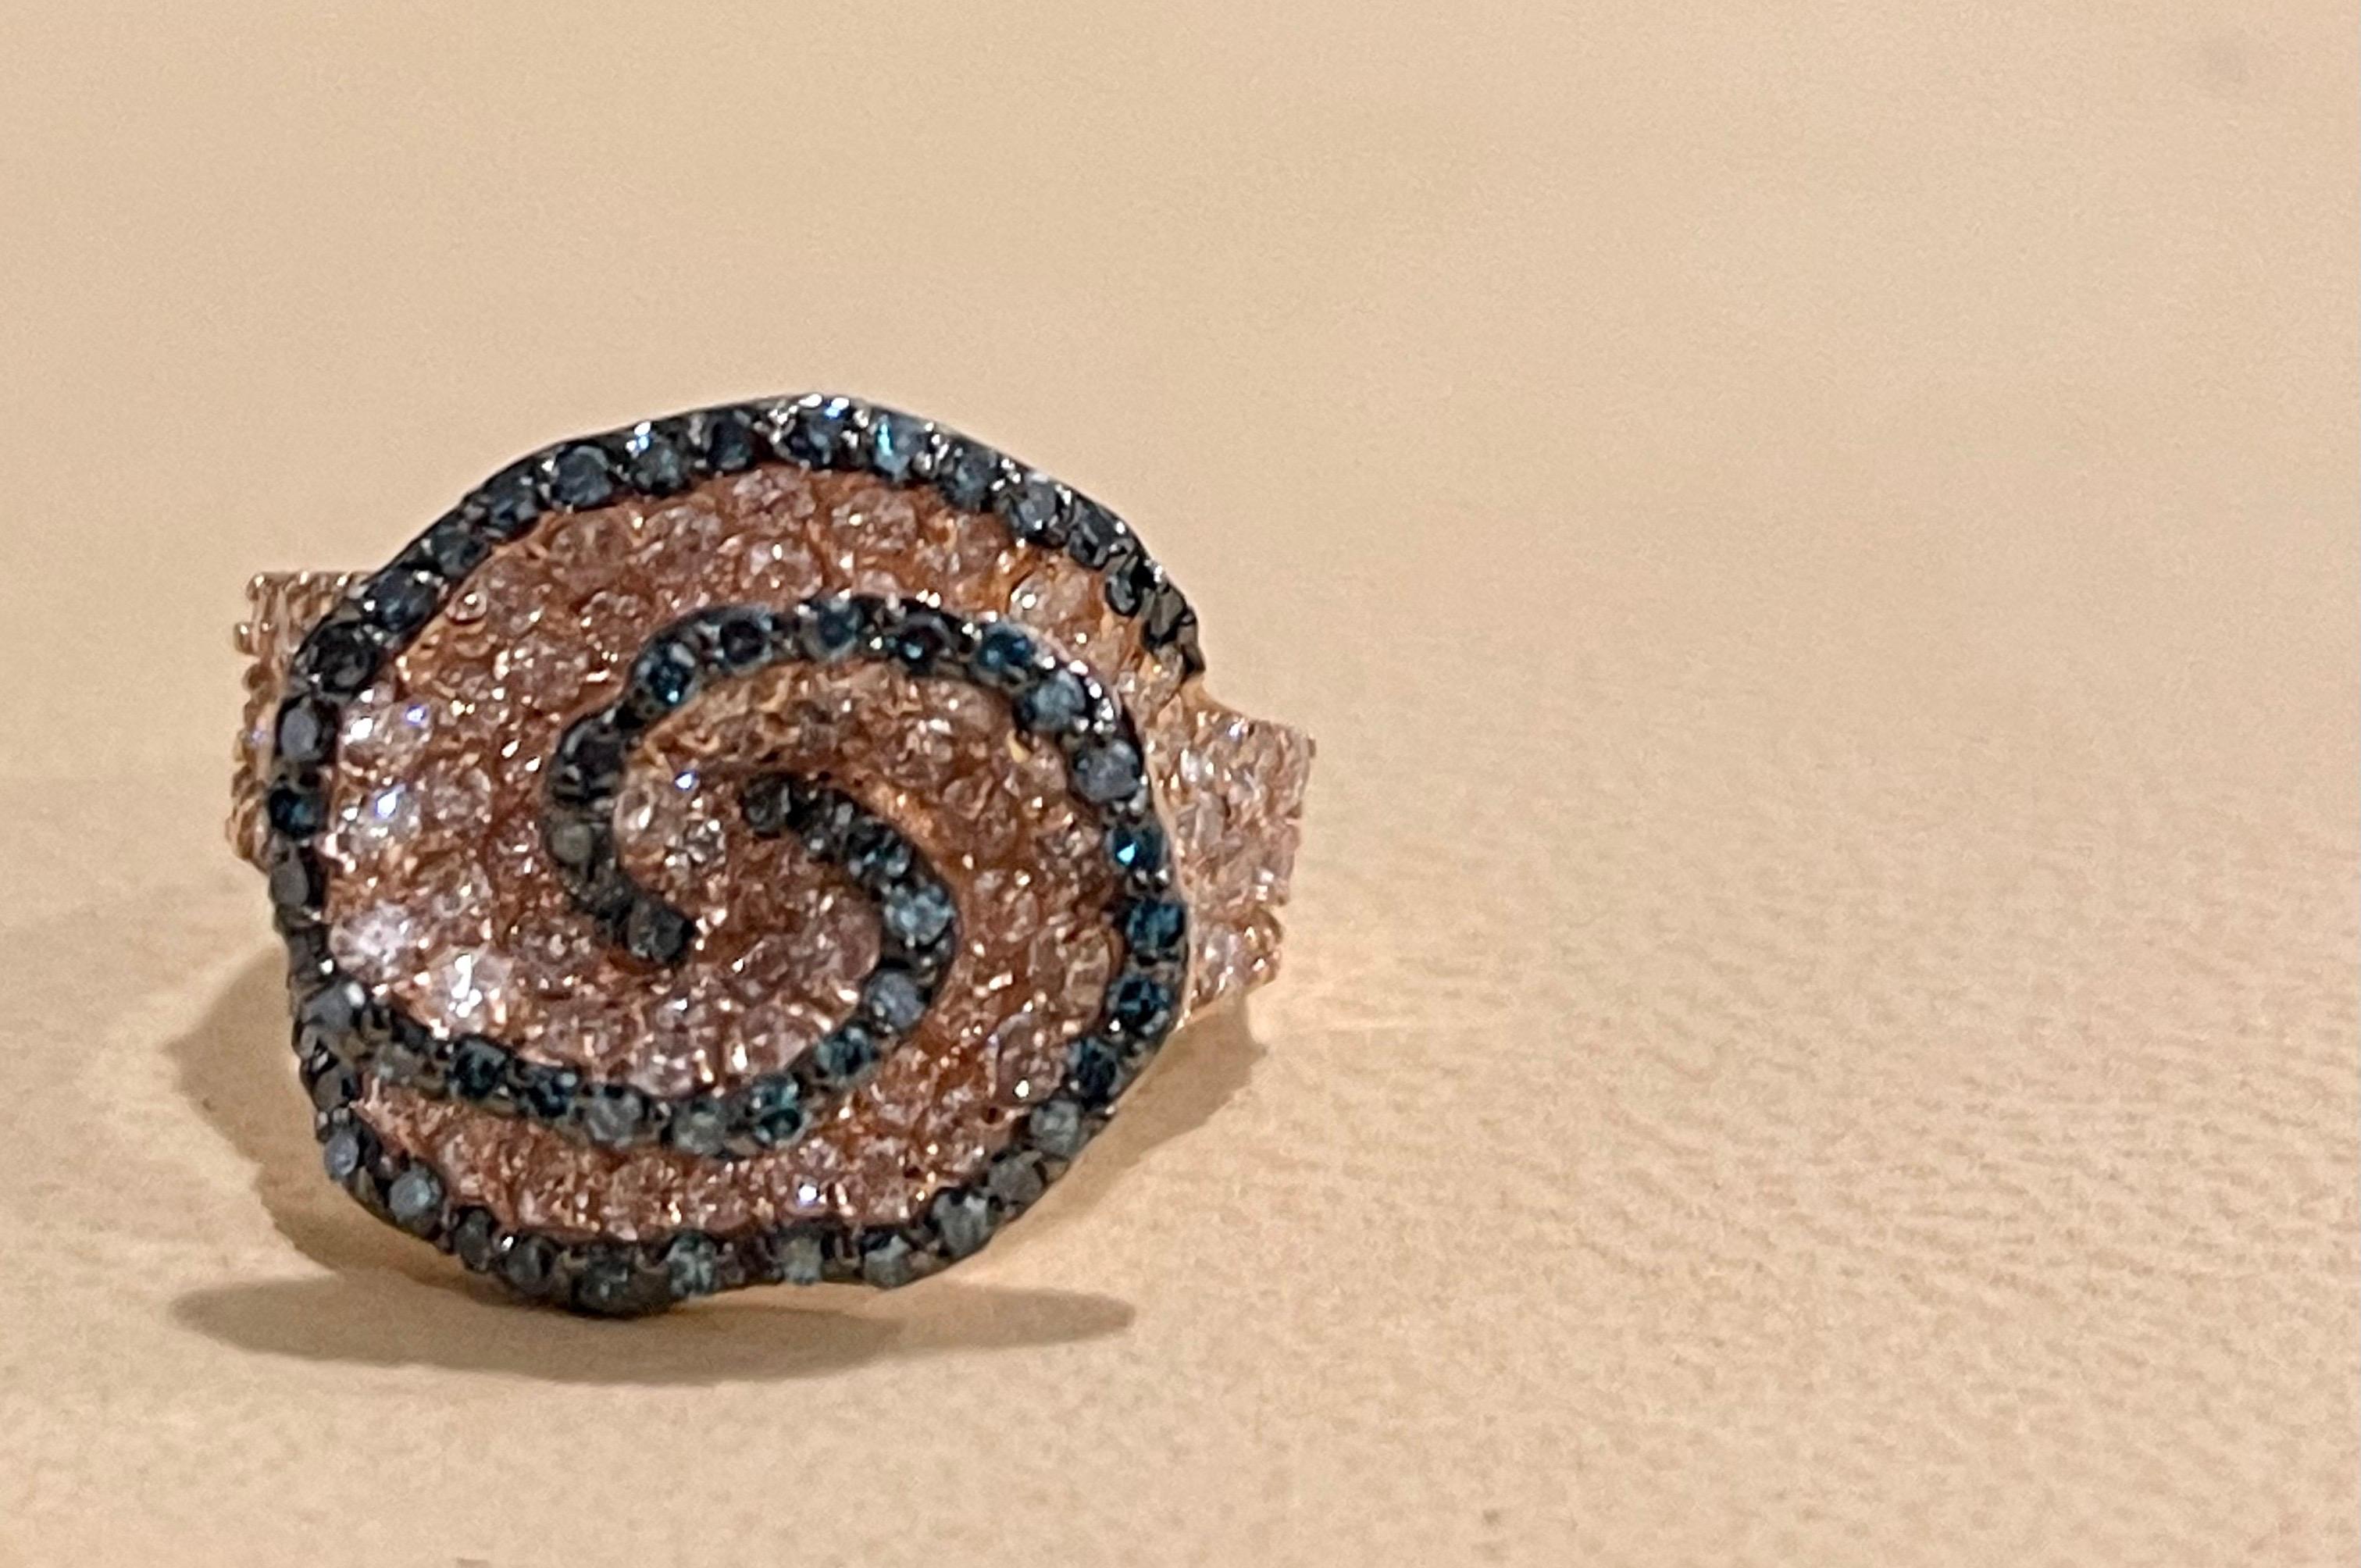 Designer Effy's 2.21 Carat Blue & White Diamond 14 Karat Rose Gold Cocktail Ring
Blue and White diamond ring in Rose or pink Gold
Total  Approximately 2.21  Brilliant cut round diamonds 
Sparkle is unbelievable.
Diamond SI to VS  quality and G/H